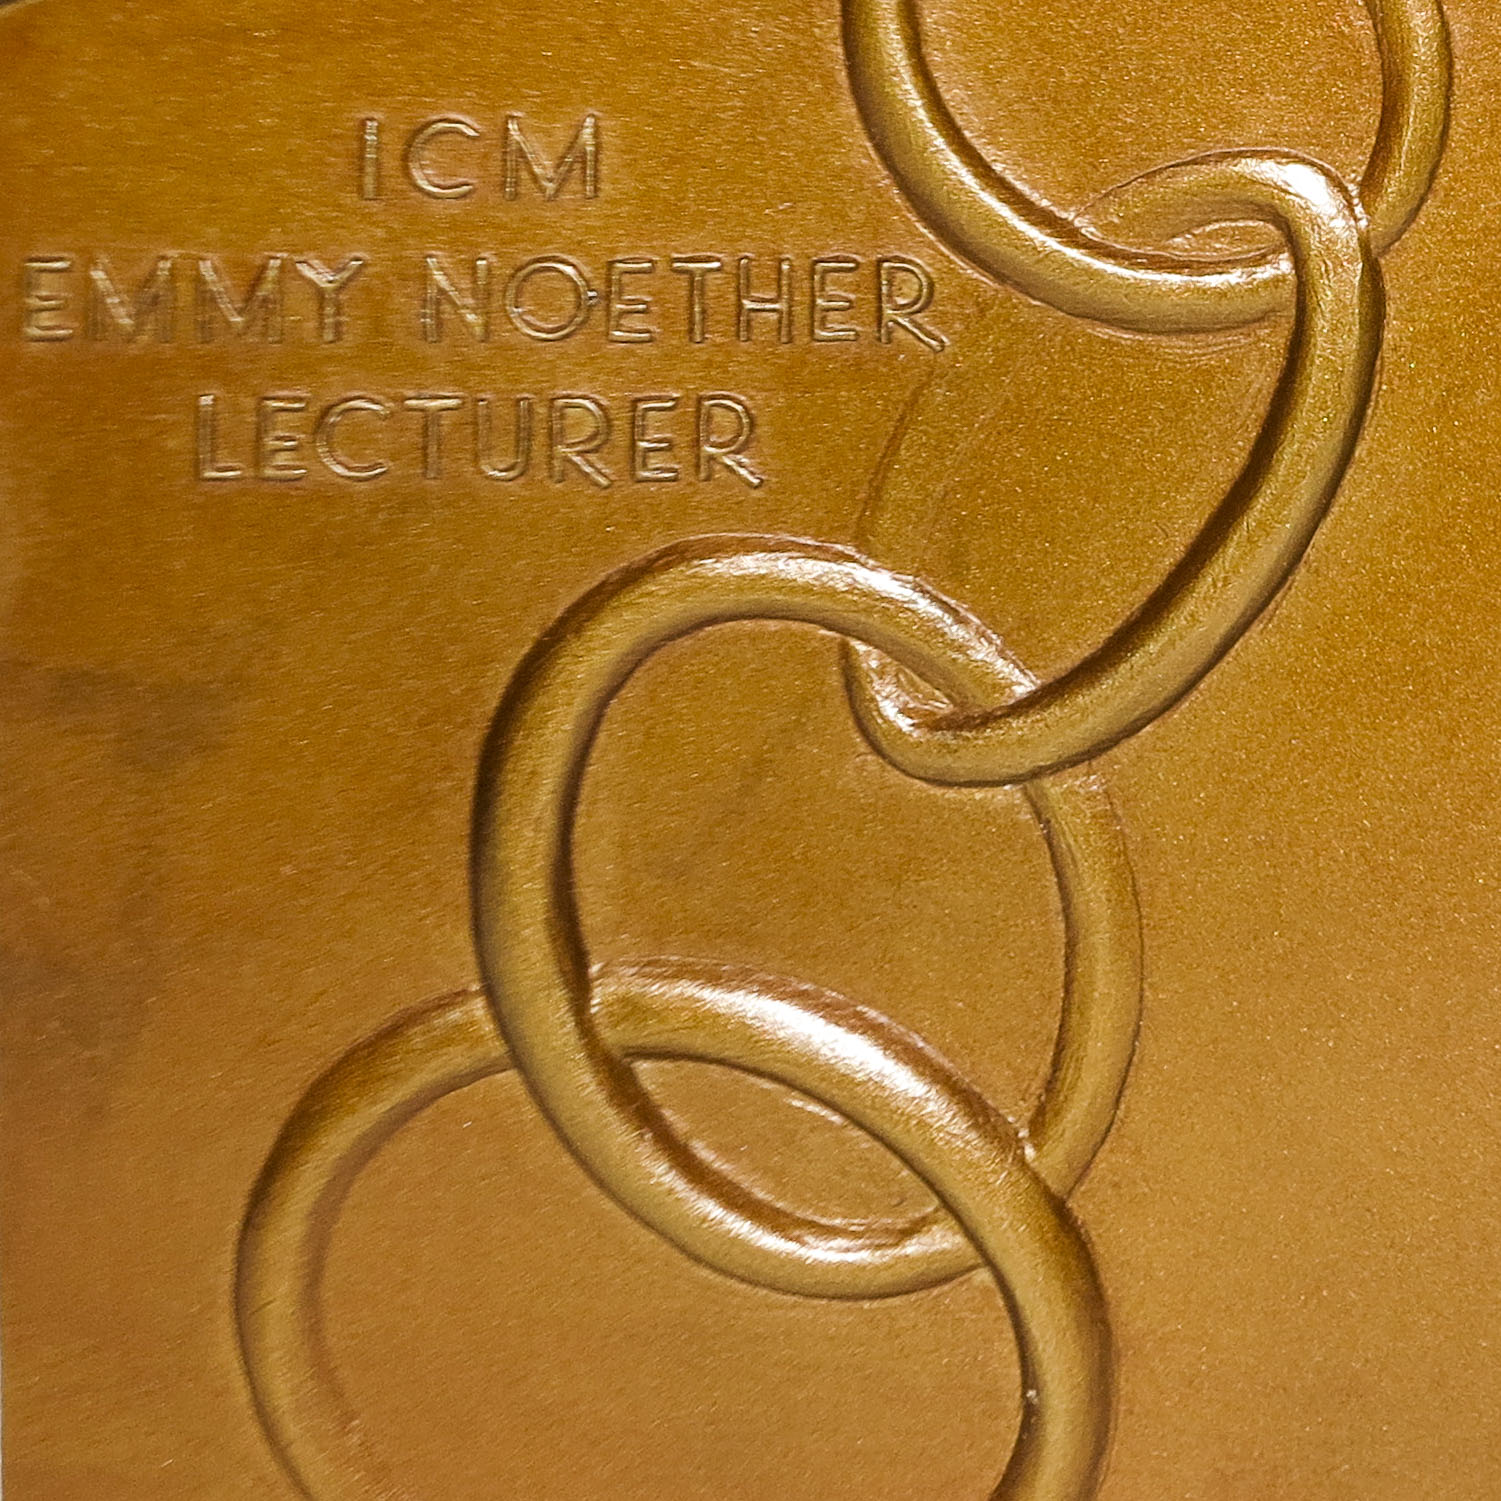 Emmy Noether Plaquette back, sculpted by Stephanie Magdziak